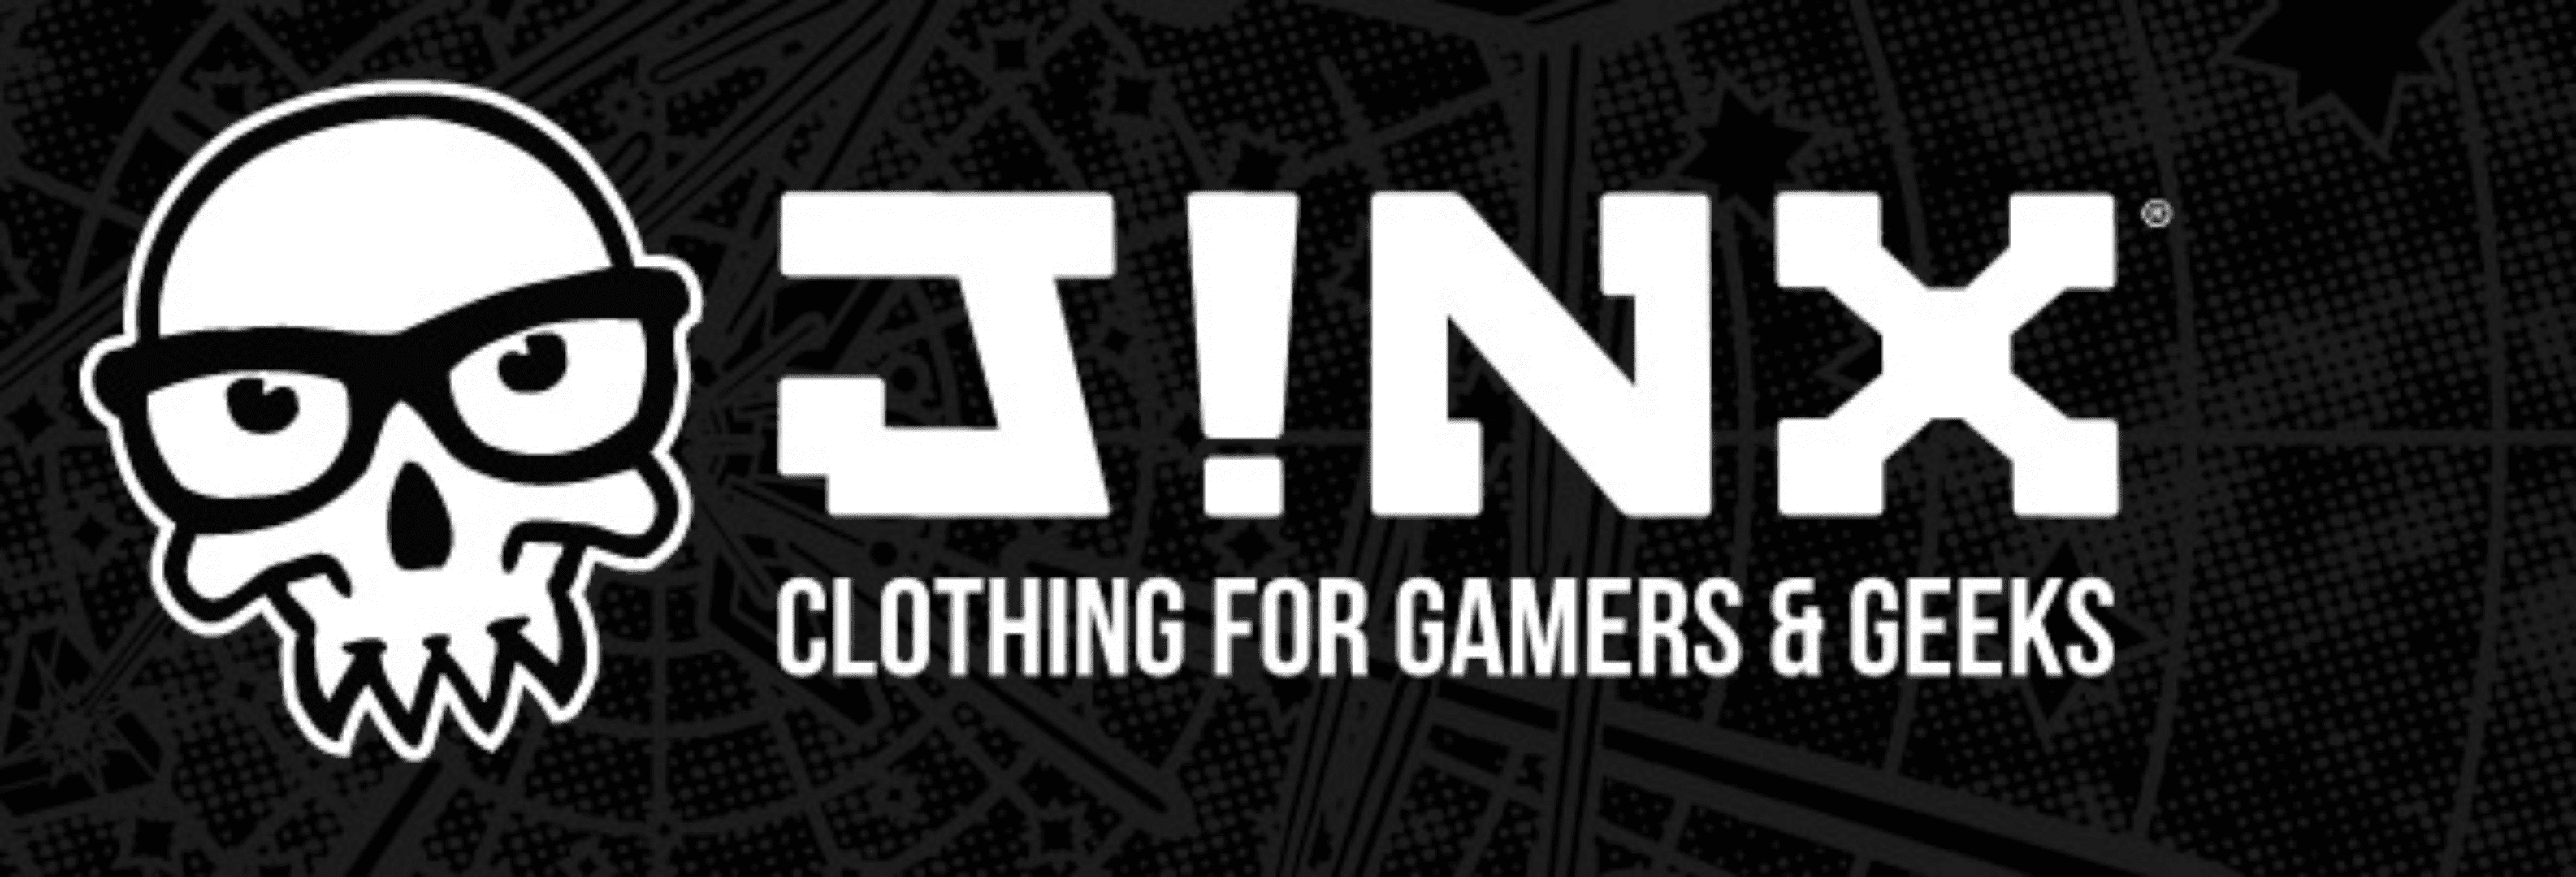 J!NX Releases Two New Lines of Apparel for Gamers